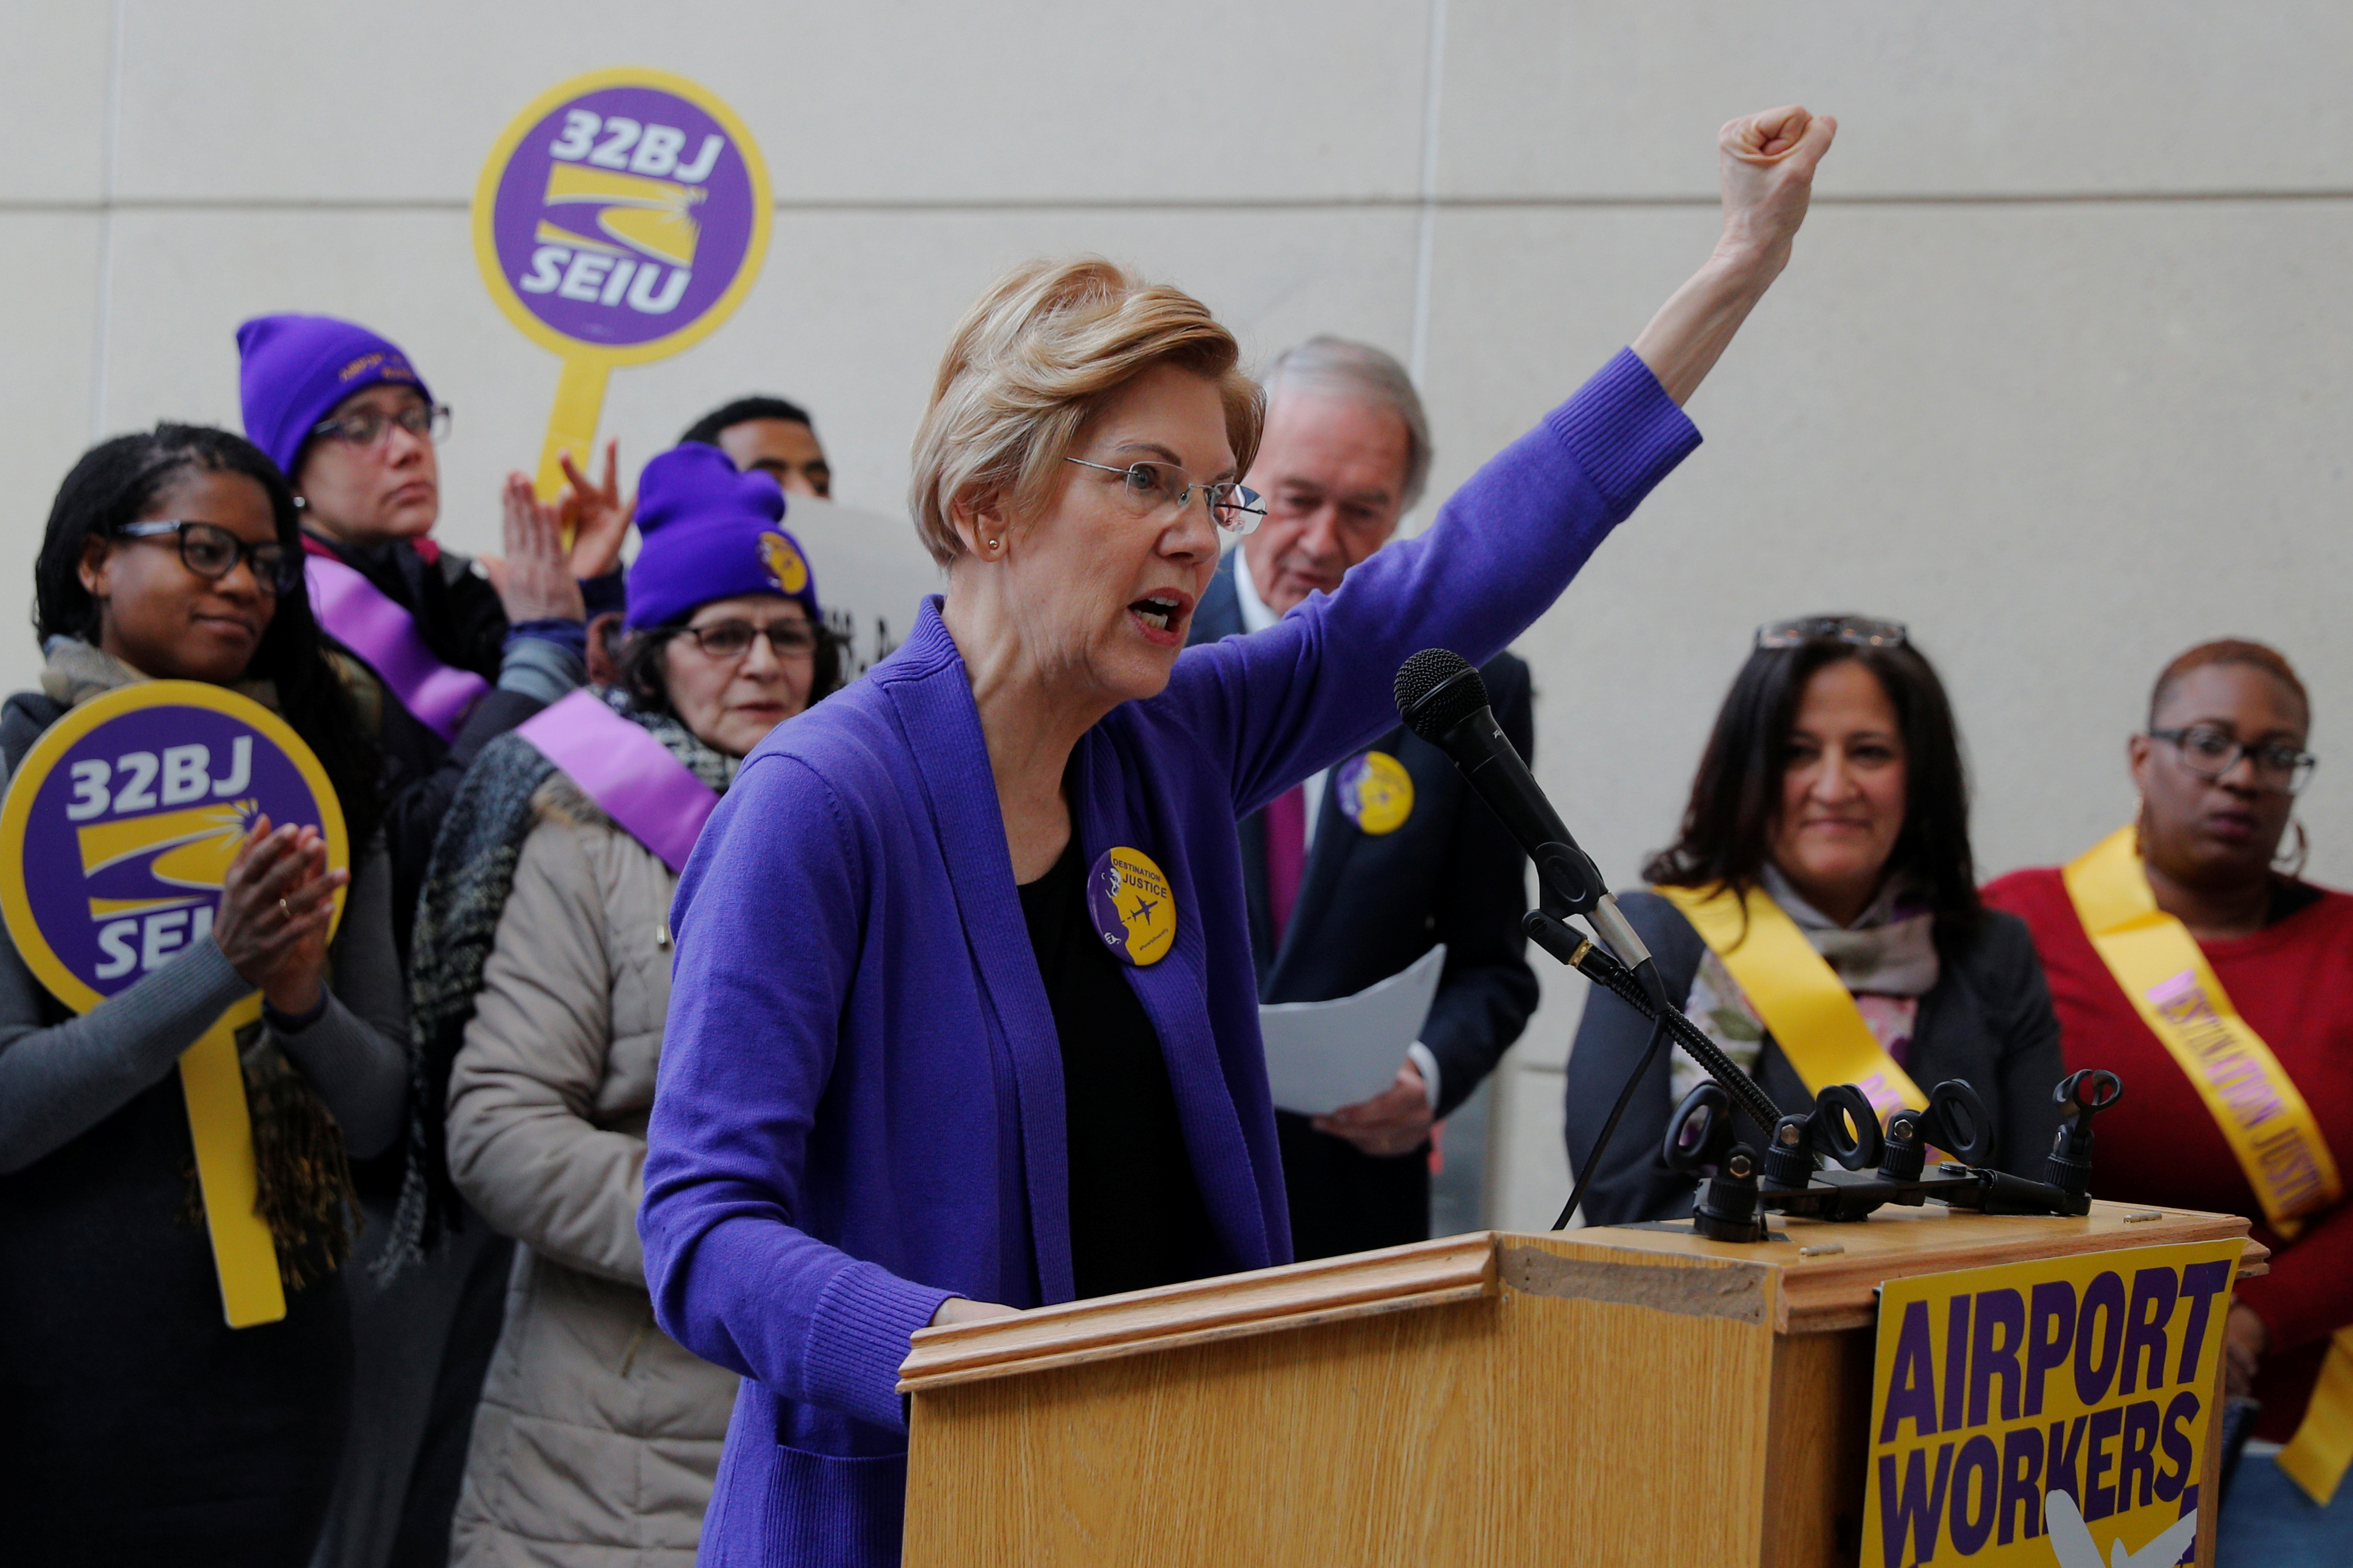 Potential 2020 Democratic presidential candidate and U.S. Senator Elizabeth Warren (D-MA) speaks about federal government employees working without pay and workers trying to unionize at Logan Airport in Boston, Massachusetts, U.S., January 21, 2019. REUTERS/Brian Snyder